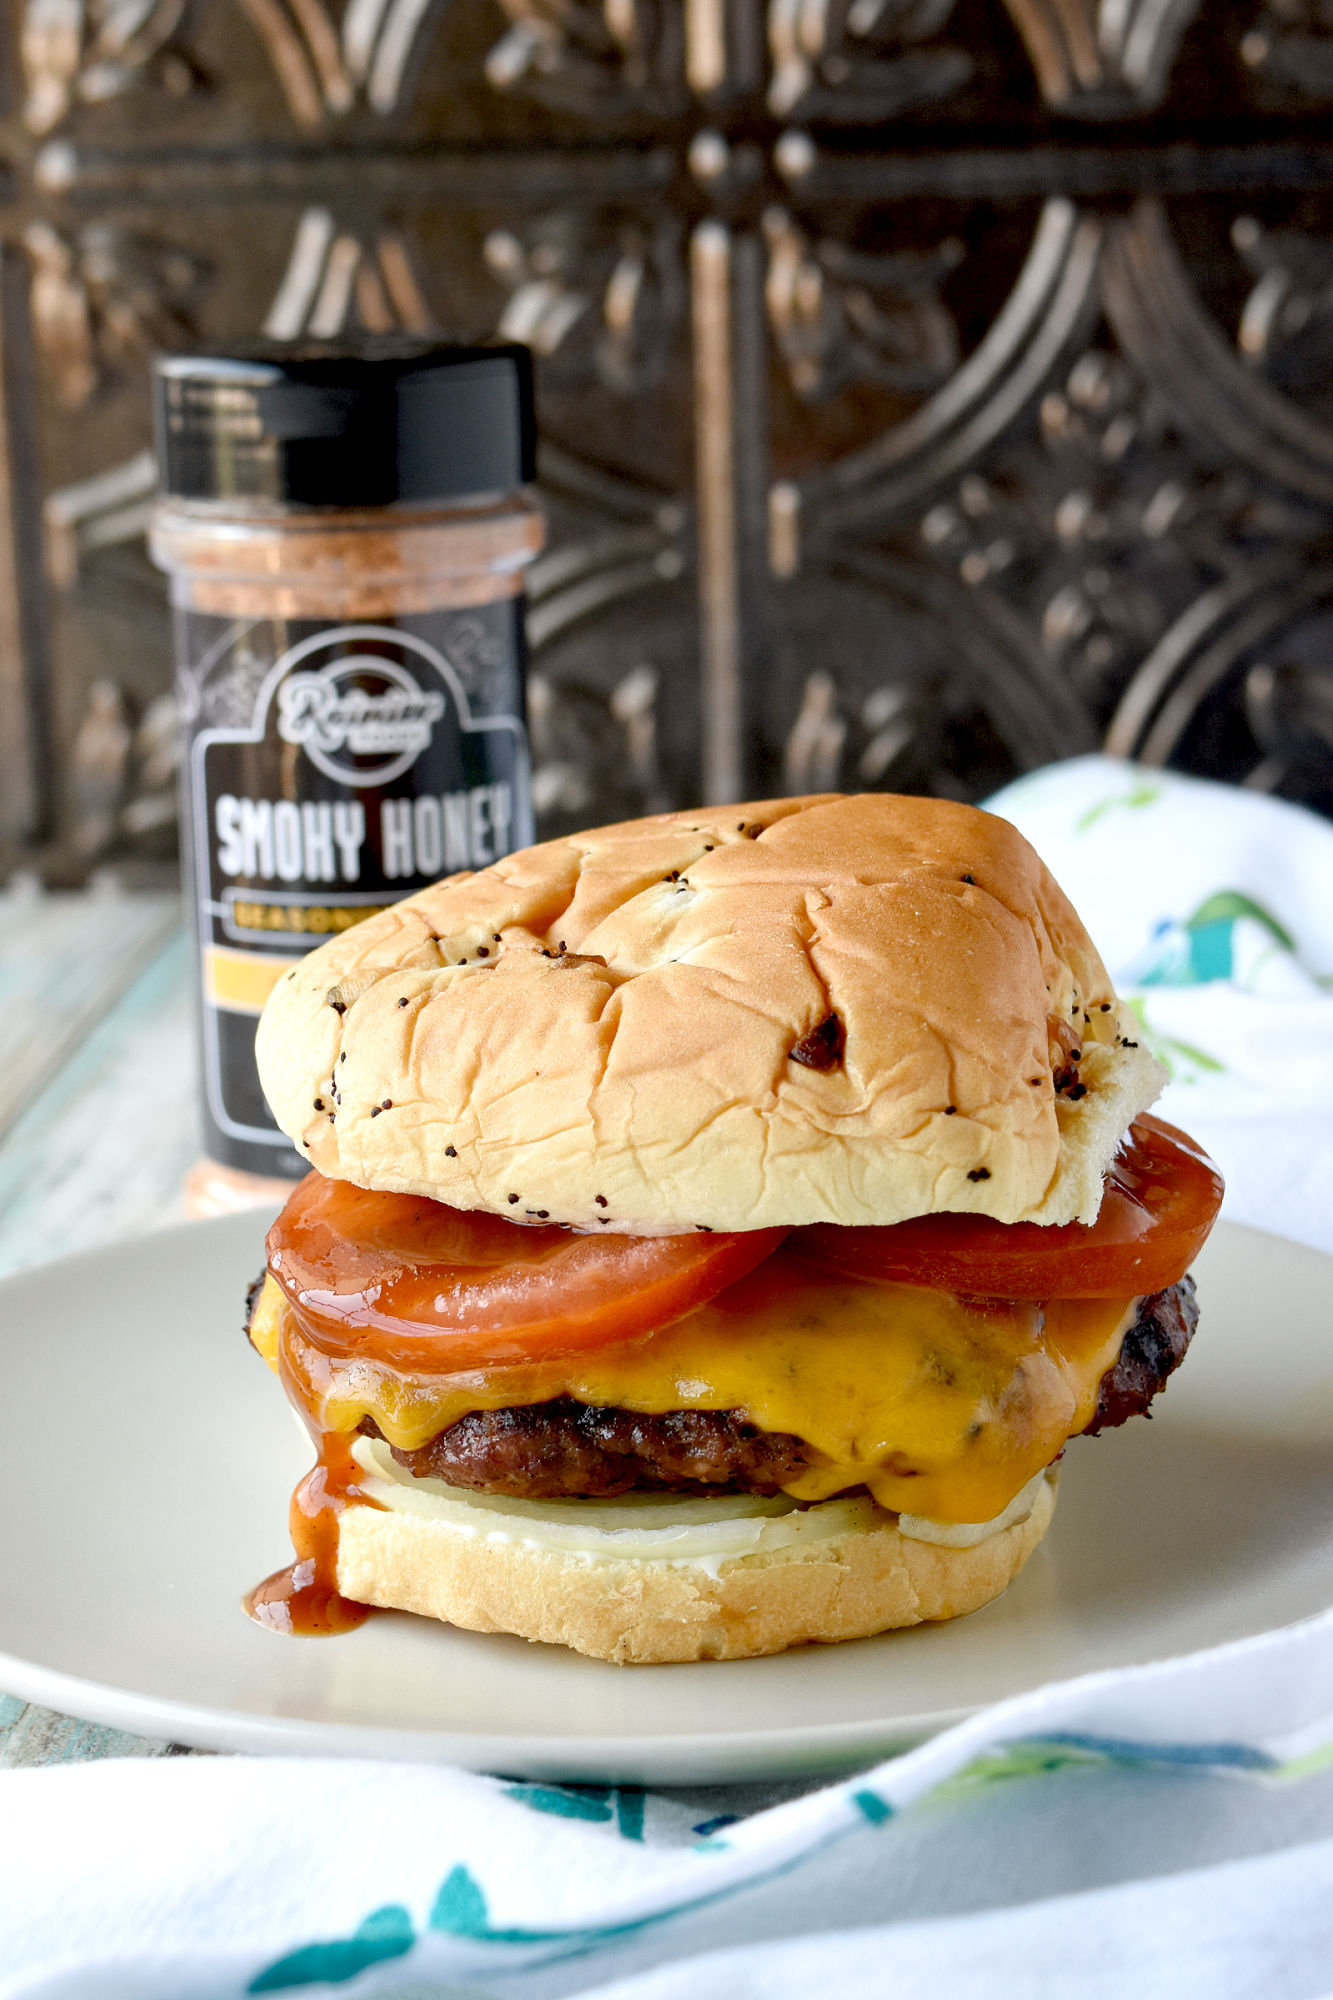 Barbecued Pork Burgers not only have barbecue sauce, but also a Smoky Honey seasoning bland that makes them smoky and sweet.  #BBQWeek